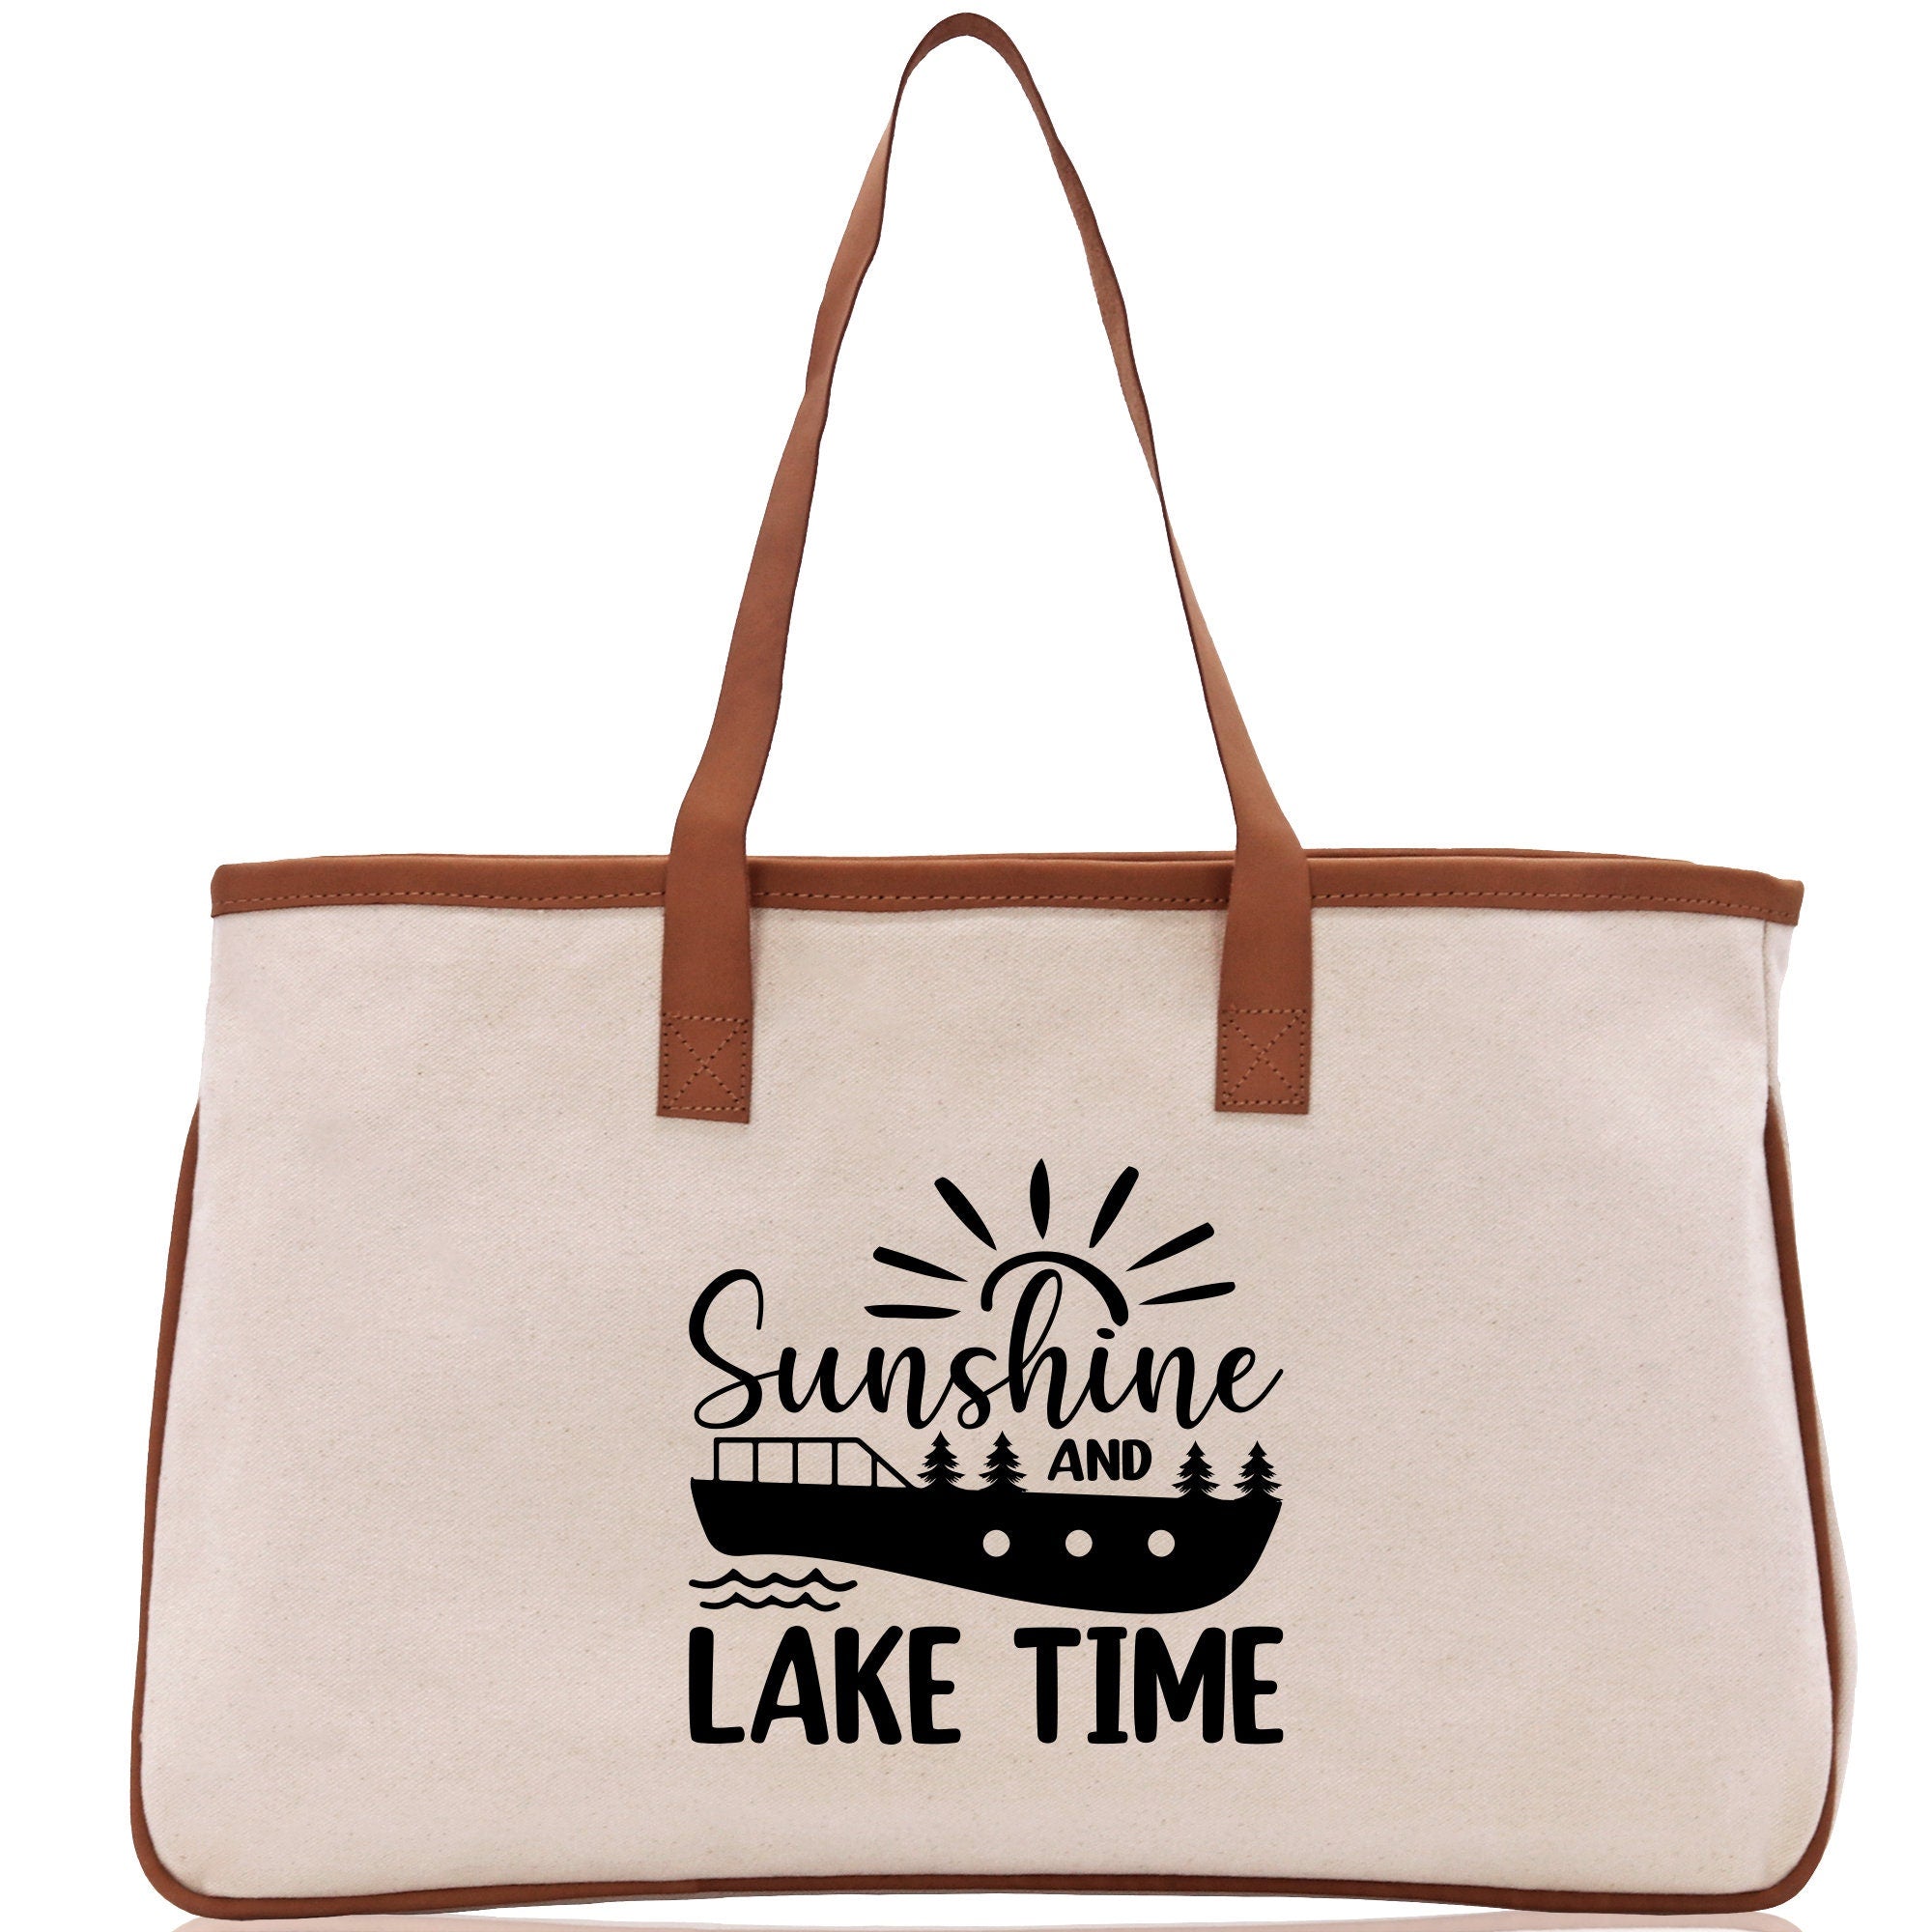 Lake Time Cotton Canvas Chic Tote Bag Camping Tote Lake Lover Gift Tote Bag Outdoor Tote Weekender Tote Laker Tote Multipurpose Tote